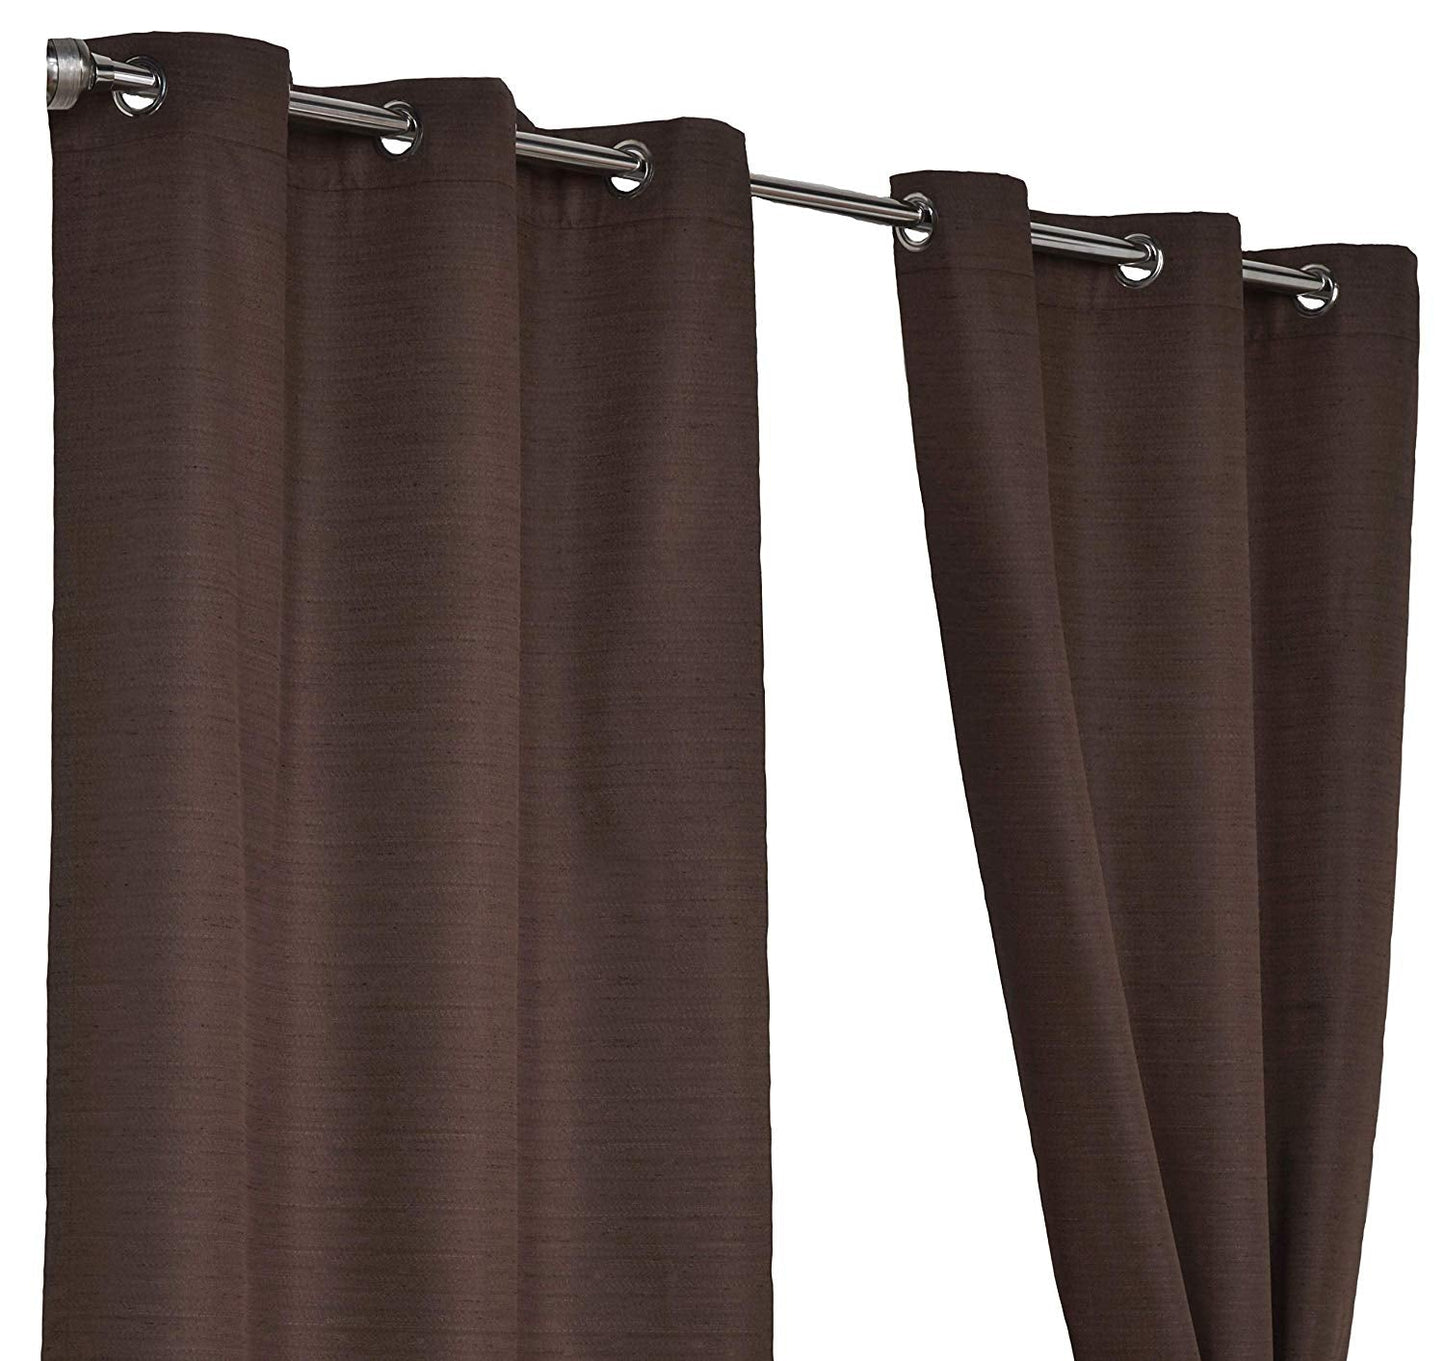 Lunar Chocolate Brown 46" x 72" Eyelet Unlined Ready Made Curtains